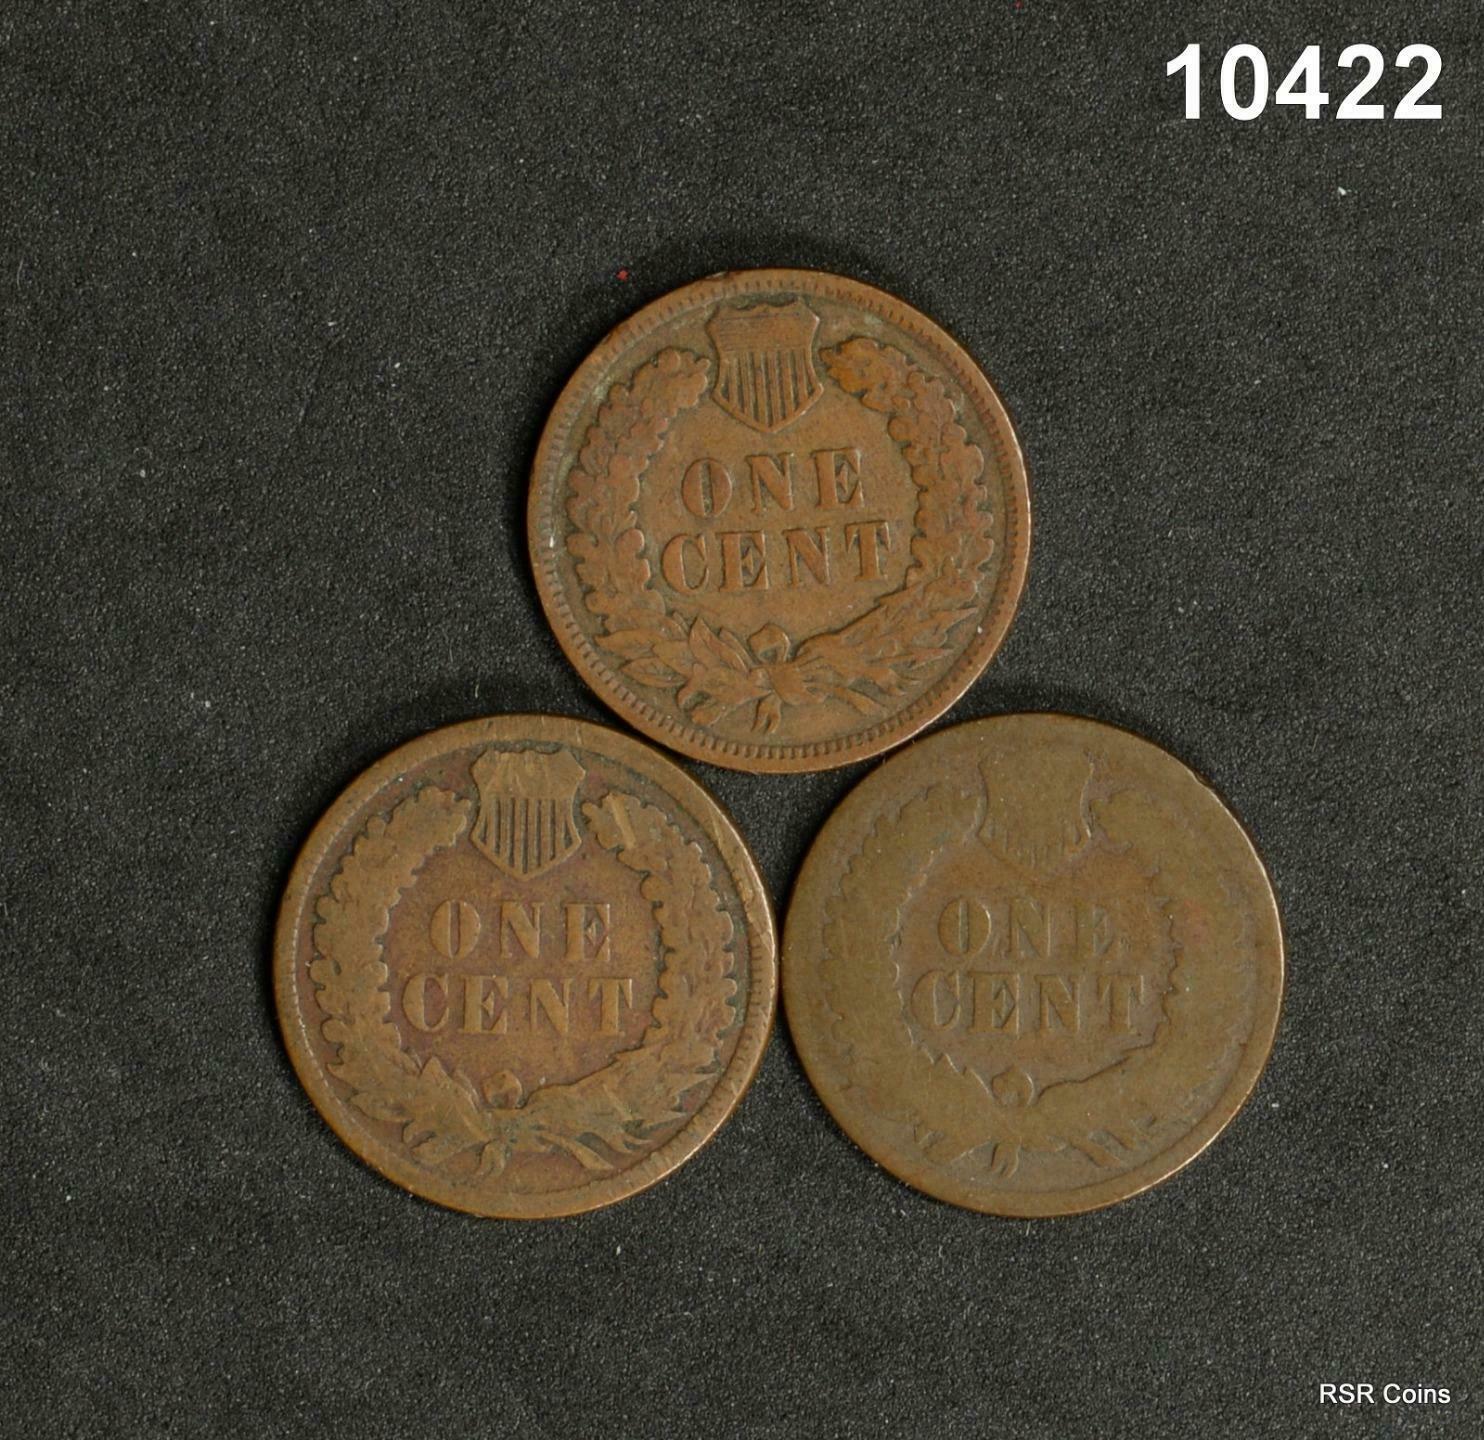 INDIAN HEAD CENTS: 1876 AG DAMAGE, 1909 VG, 1884 VG CORRODED #10422